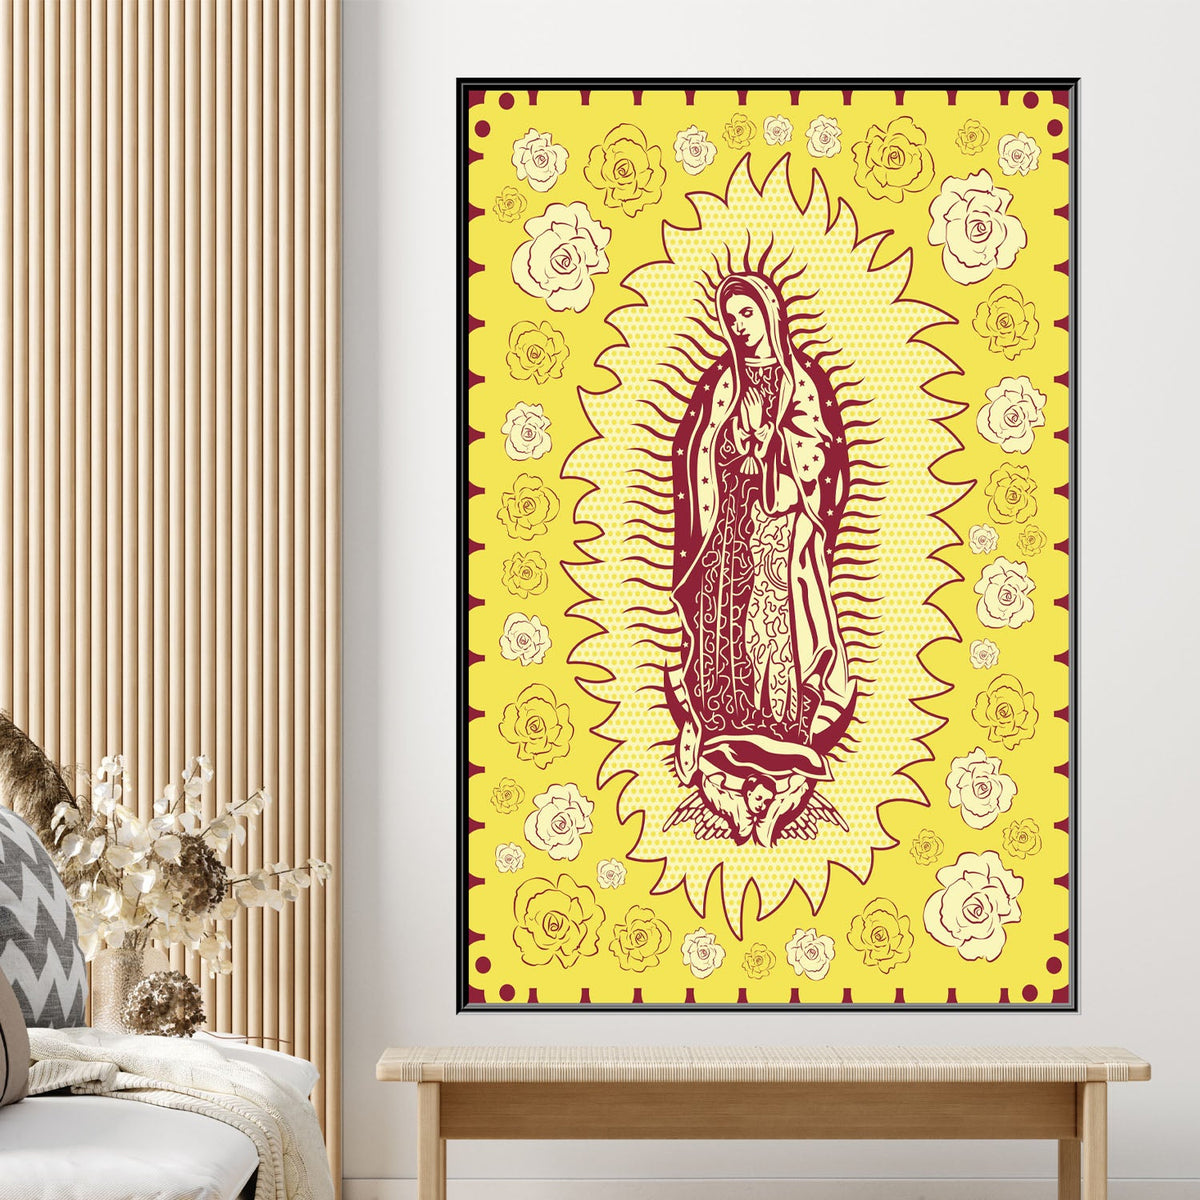 https://cdn.shopify.com/s/files/1/0387/9986/8044/products/OurLadyofGuadalupeCanvasArtprintFloatingFrame-1.jpg